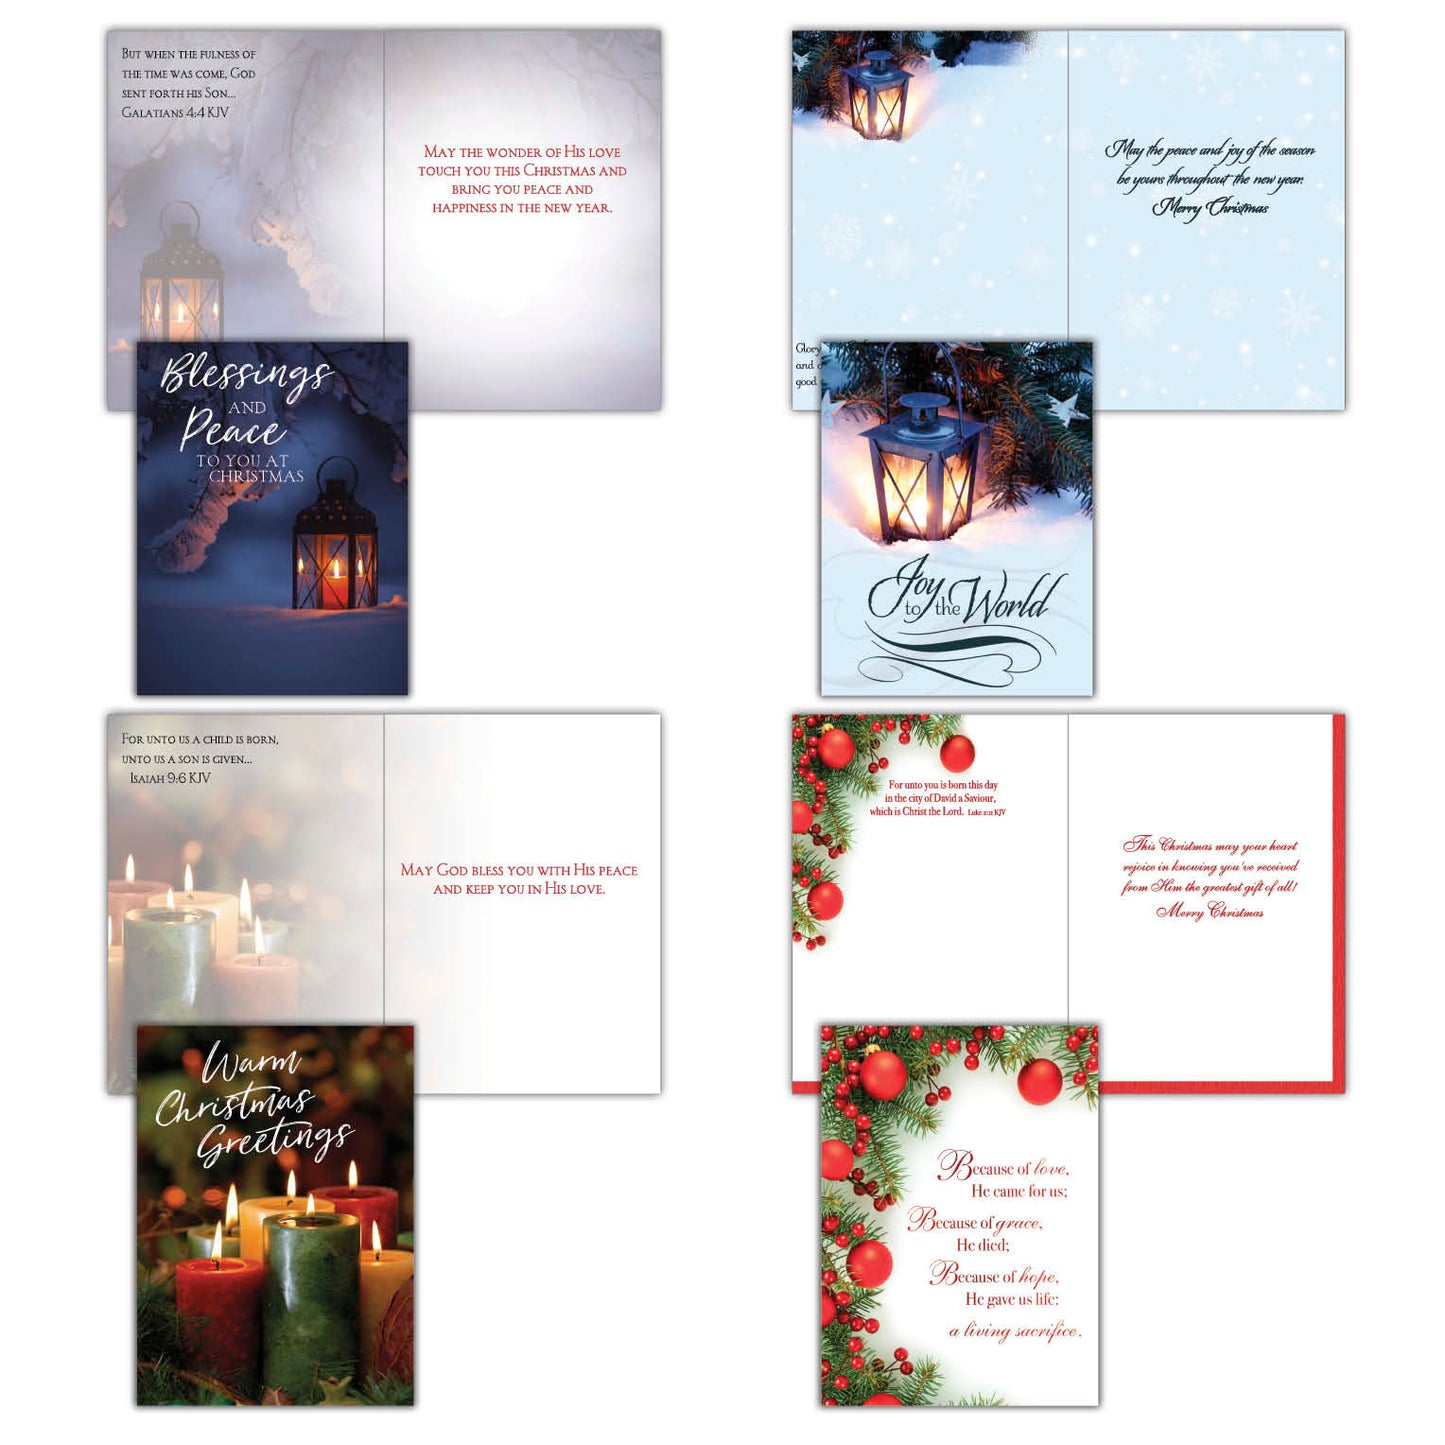 Extra Large Boxed Christmas Card Assortment - God's Blessings - 48 Cards and Envelopes